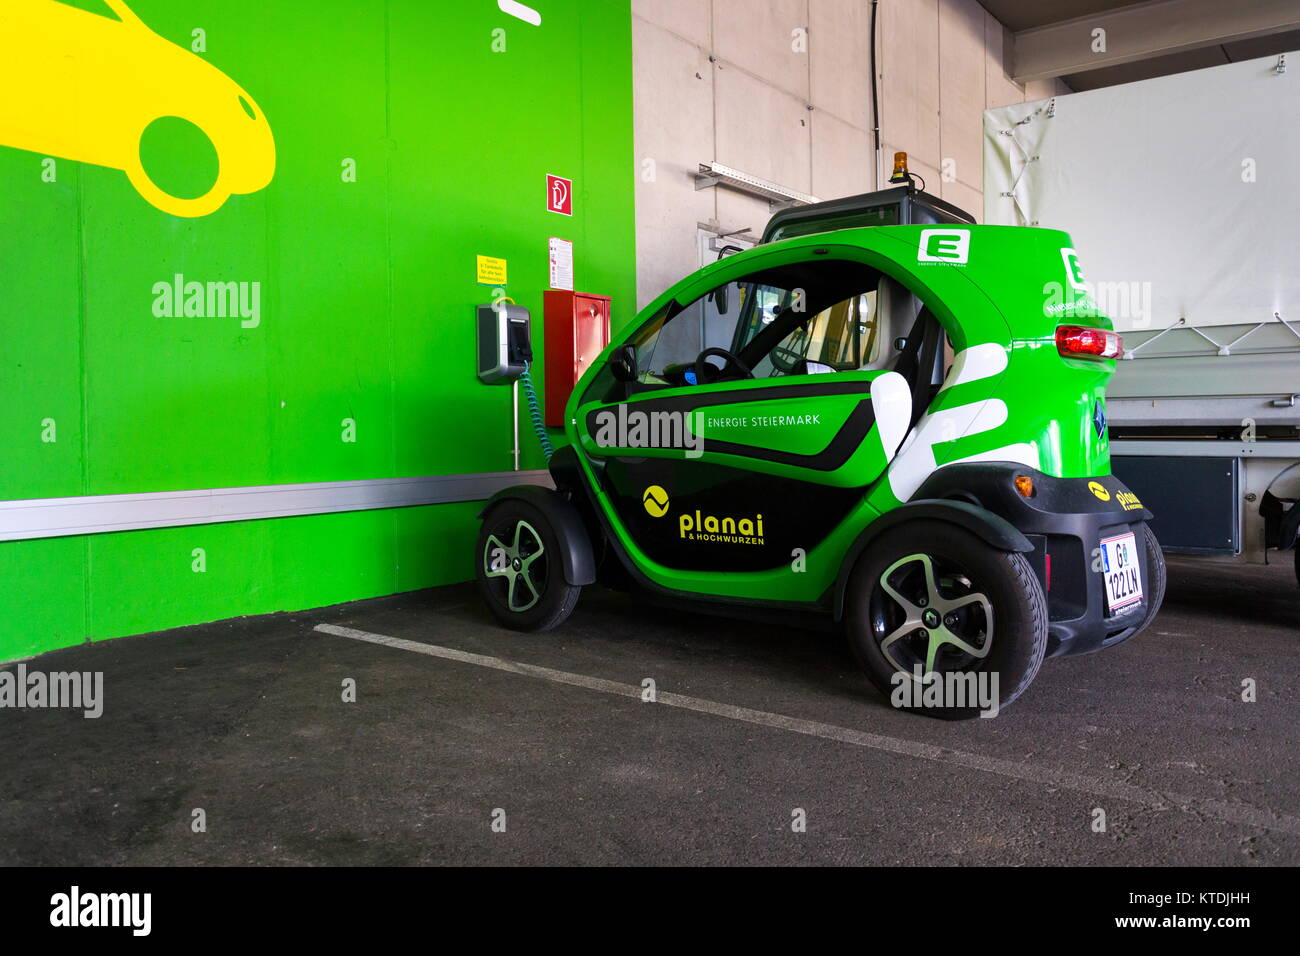 SCHLADMING, AUSTRIA - AUGUST 15: Renault Twizy electric city car stands at Energie Steiermark charching station Stock Photo